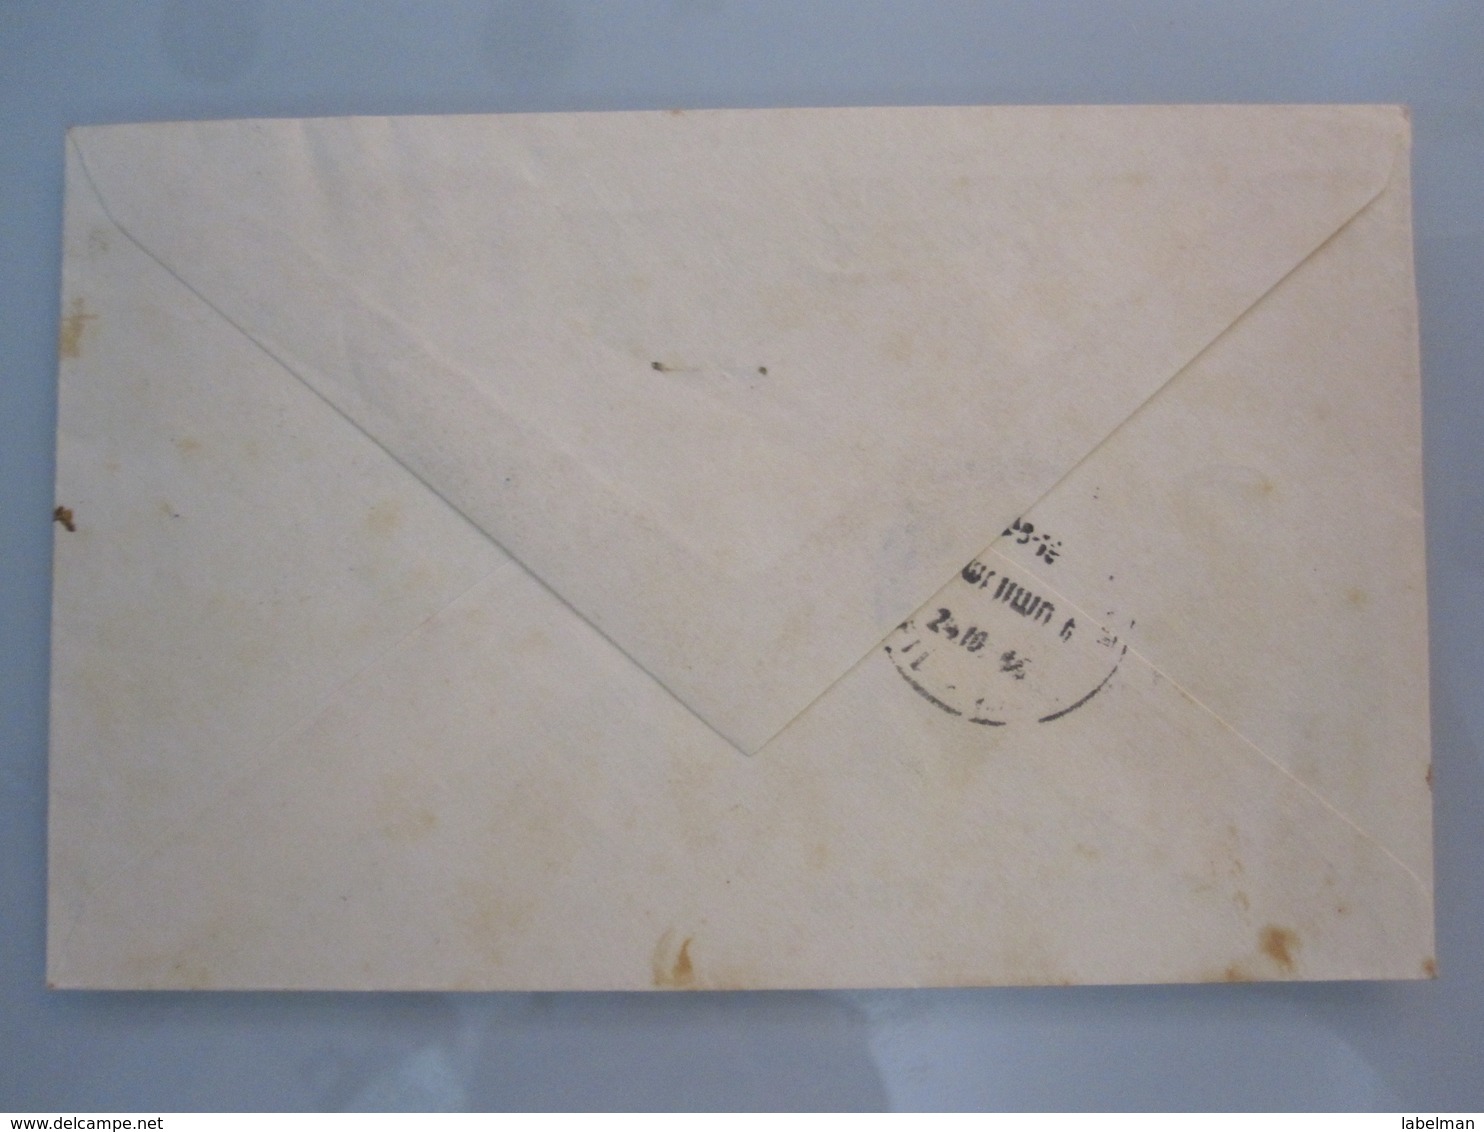 1955 POO FIRST DAY POST OFFICE OPENING KIBBUTZ GIVAT HAYM CHAYM MAIL STAMP ENVELOPE ISRAEL JUDAICA CACHET COVER - Covers & Documents